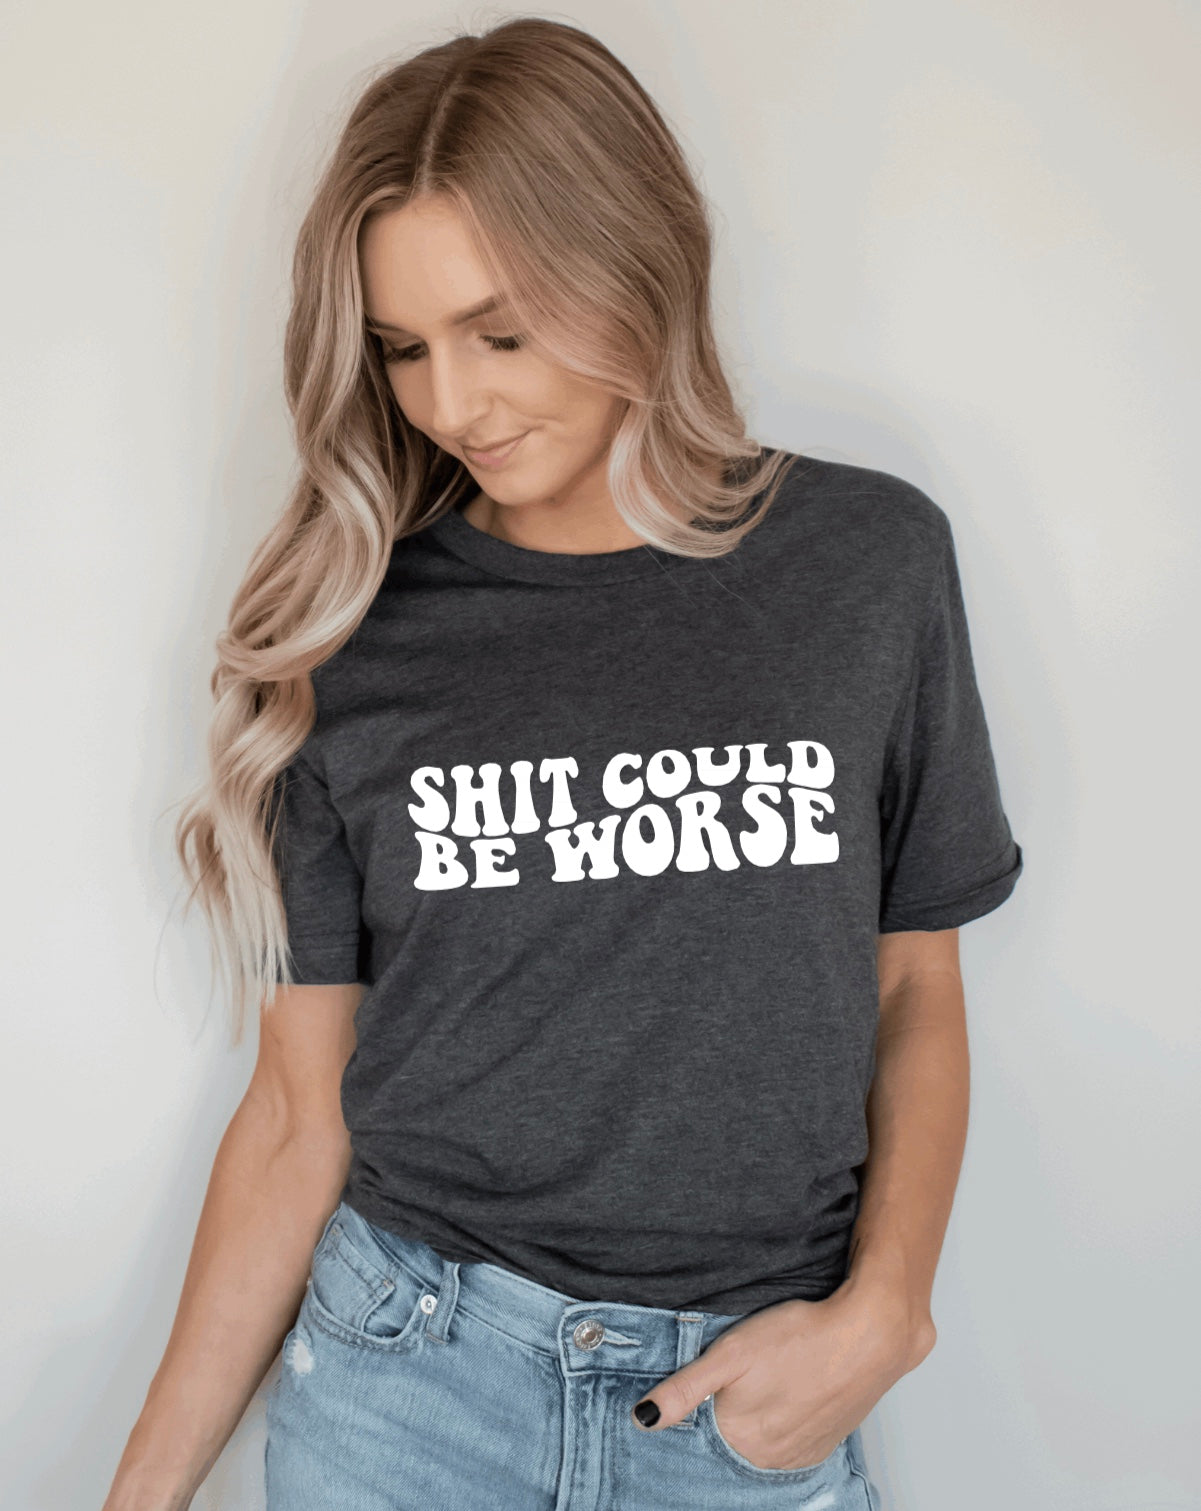 Shit could be worse t-shirt 